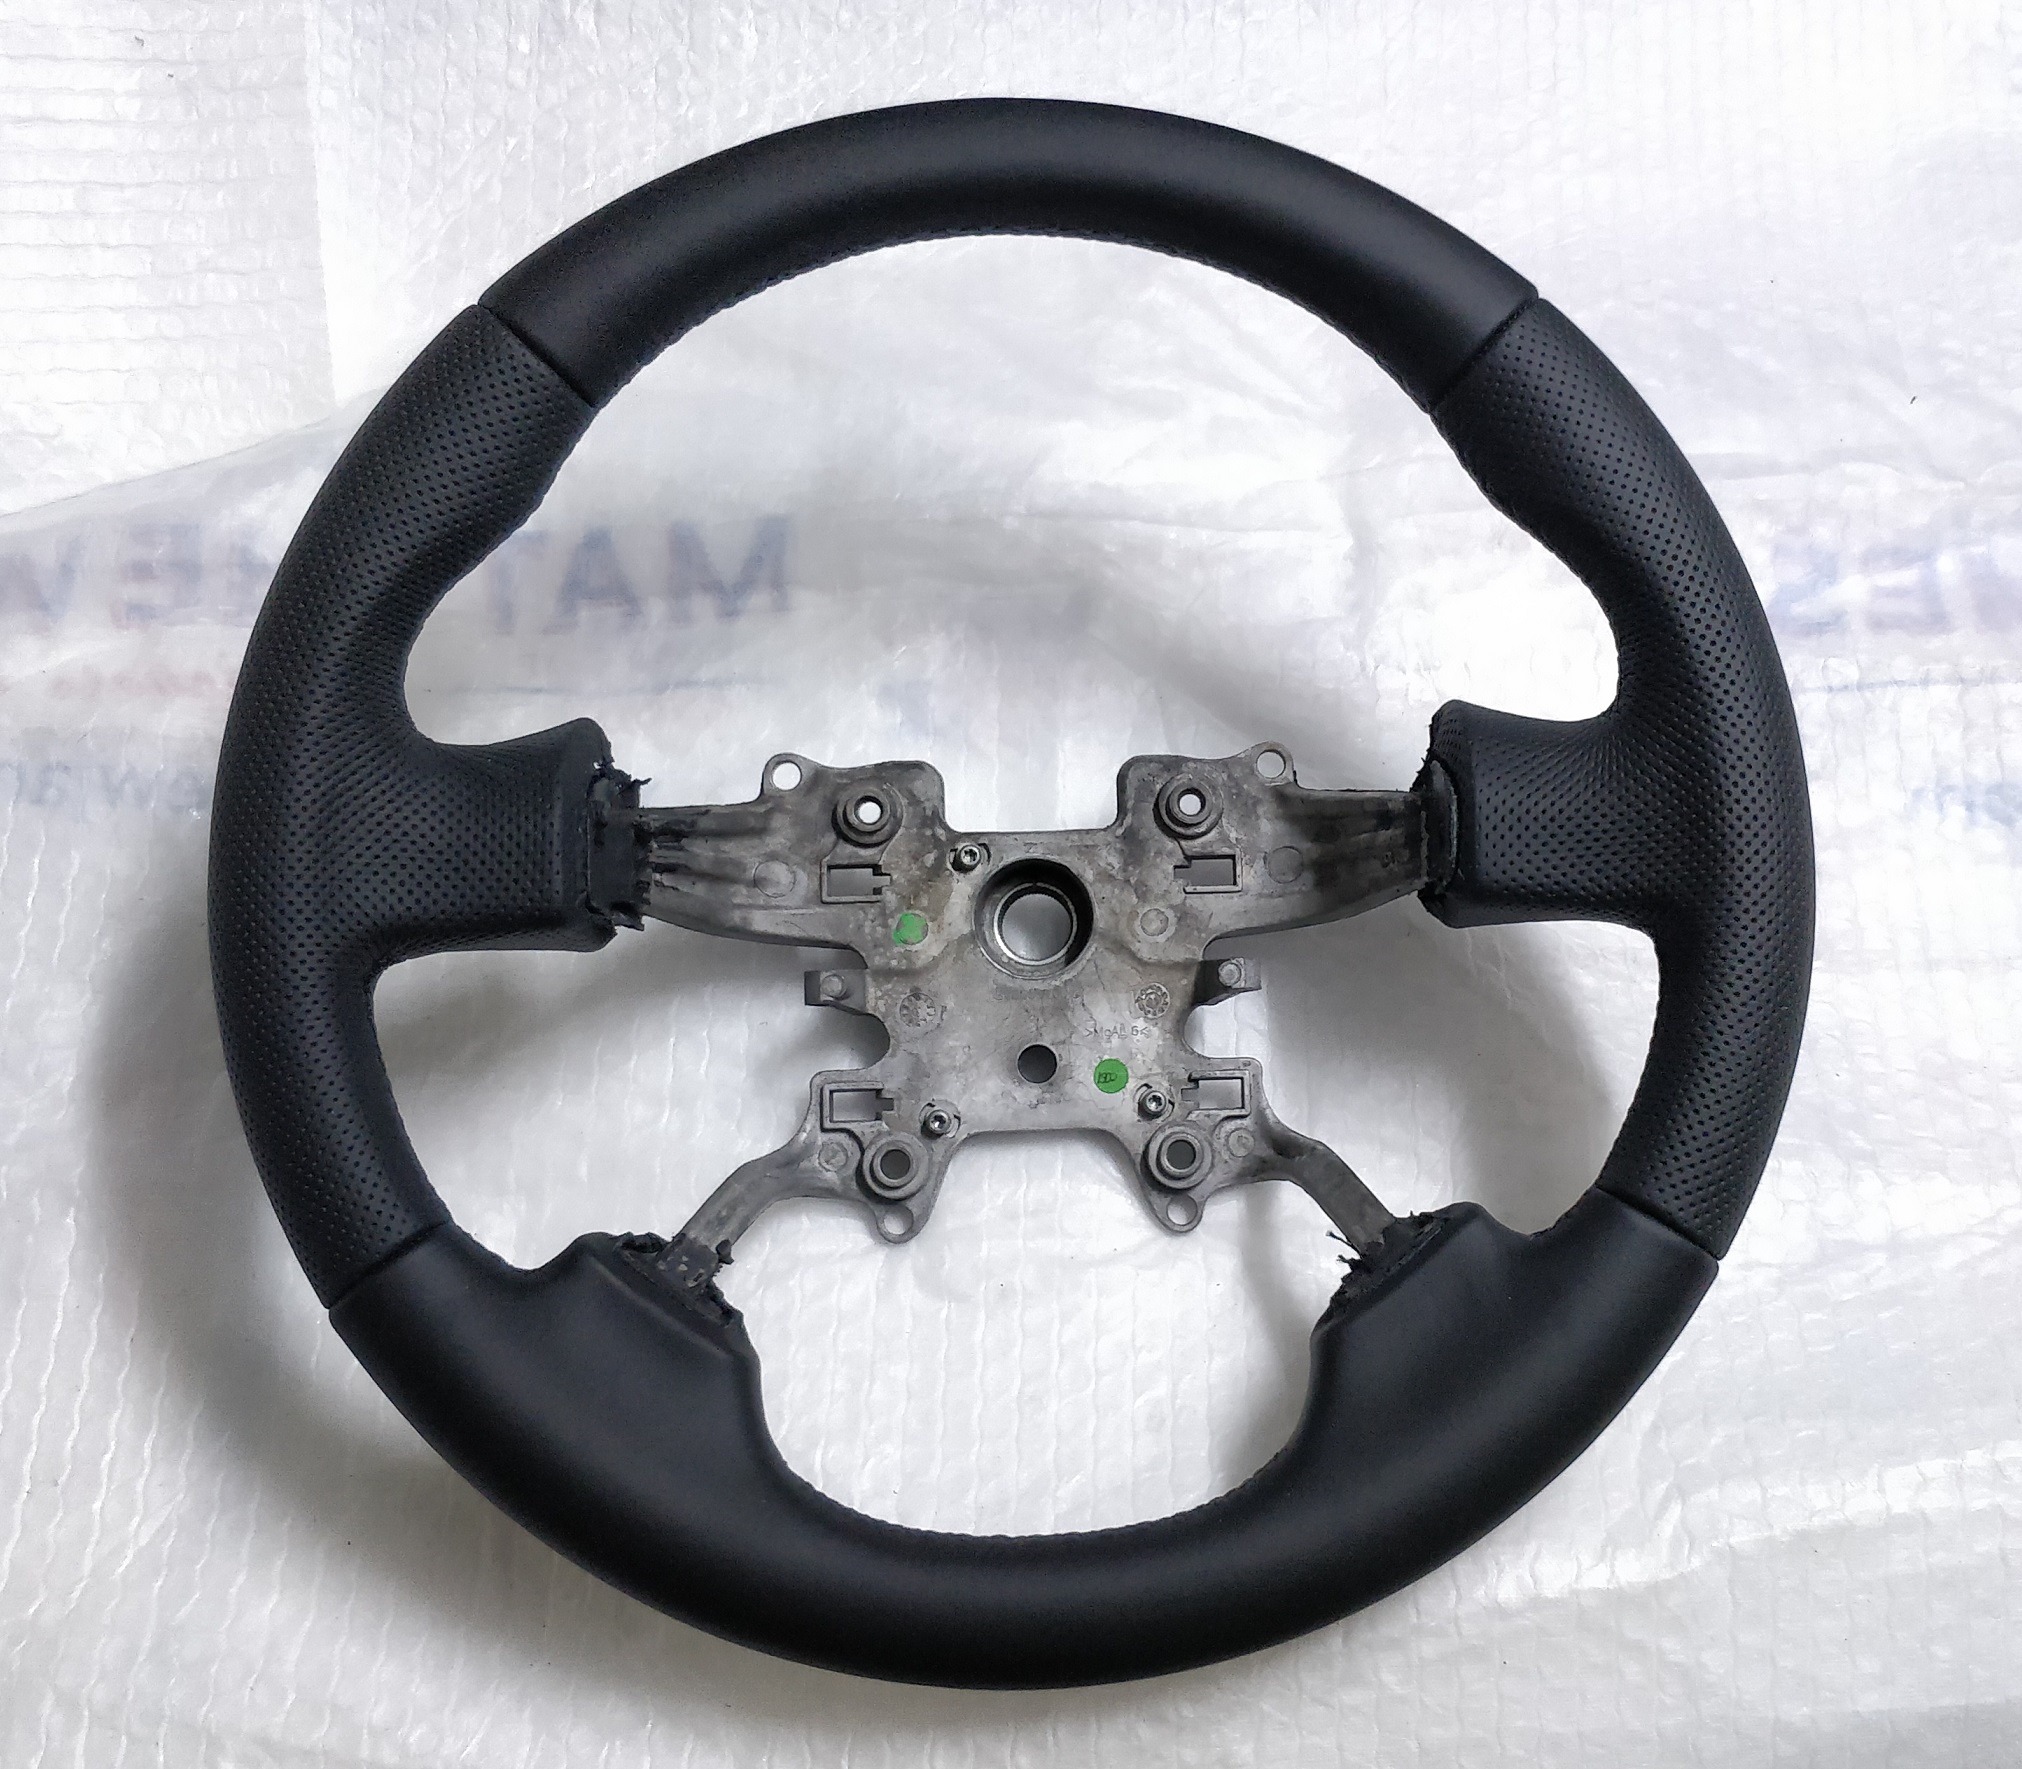 Land Rover DISCOVERY 3 steering wheel new leather